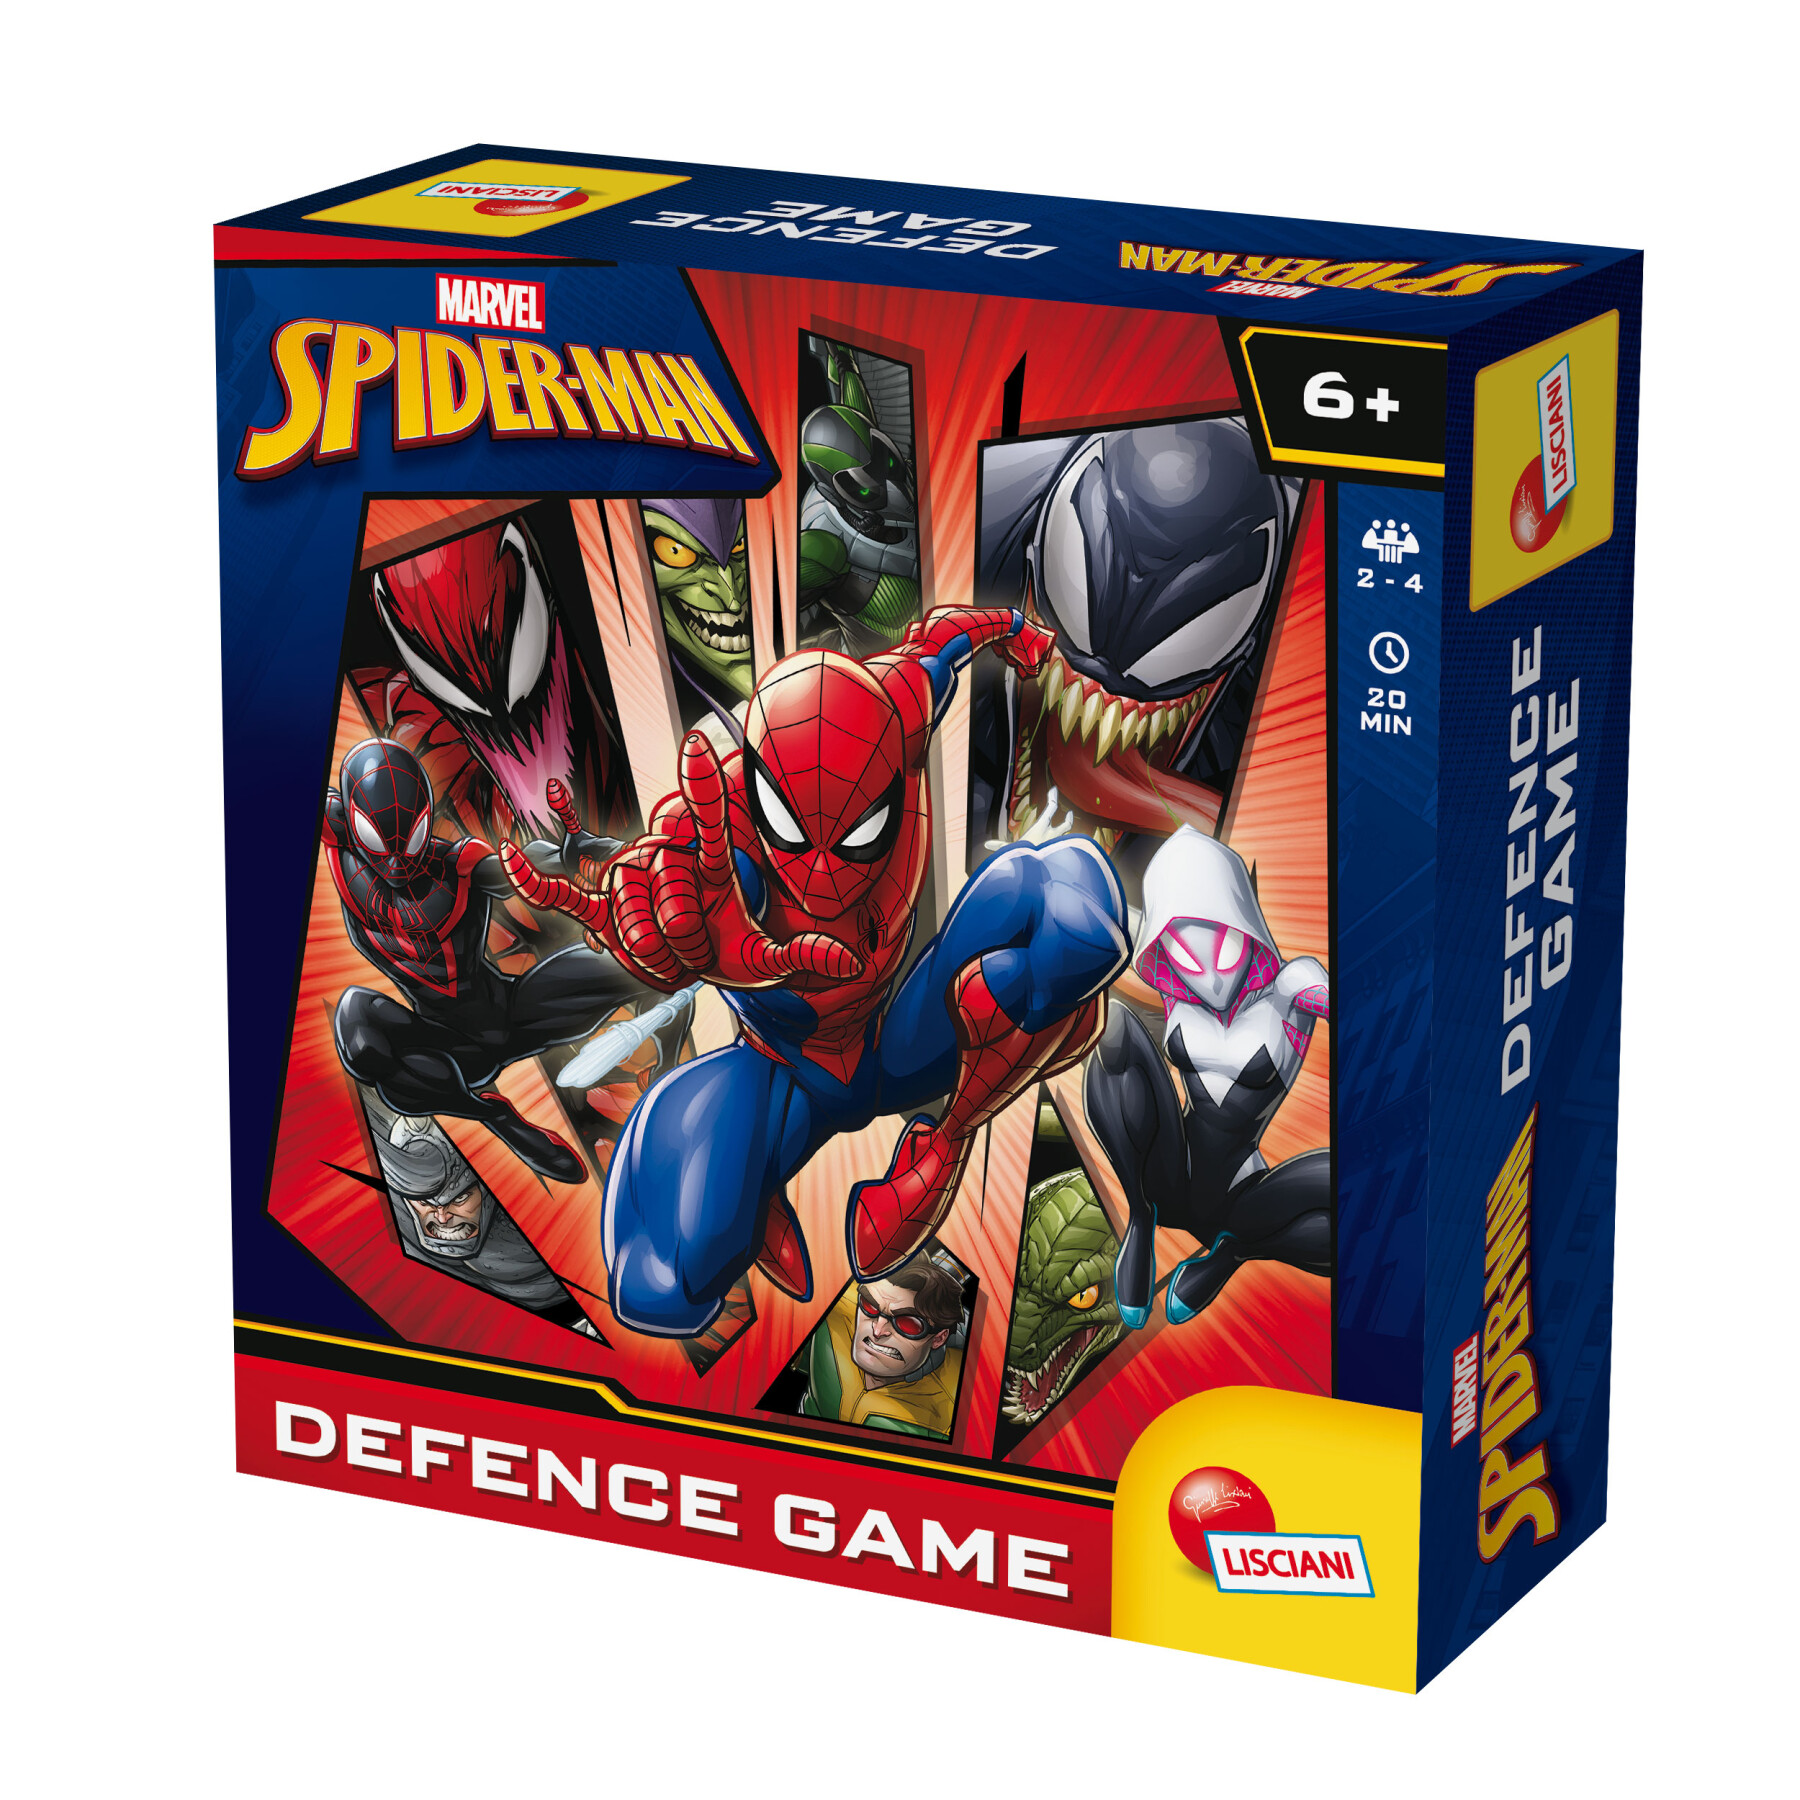 Spider-man defence game - LISCIANI, Avengers, Spiderman